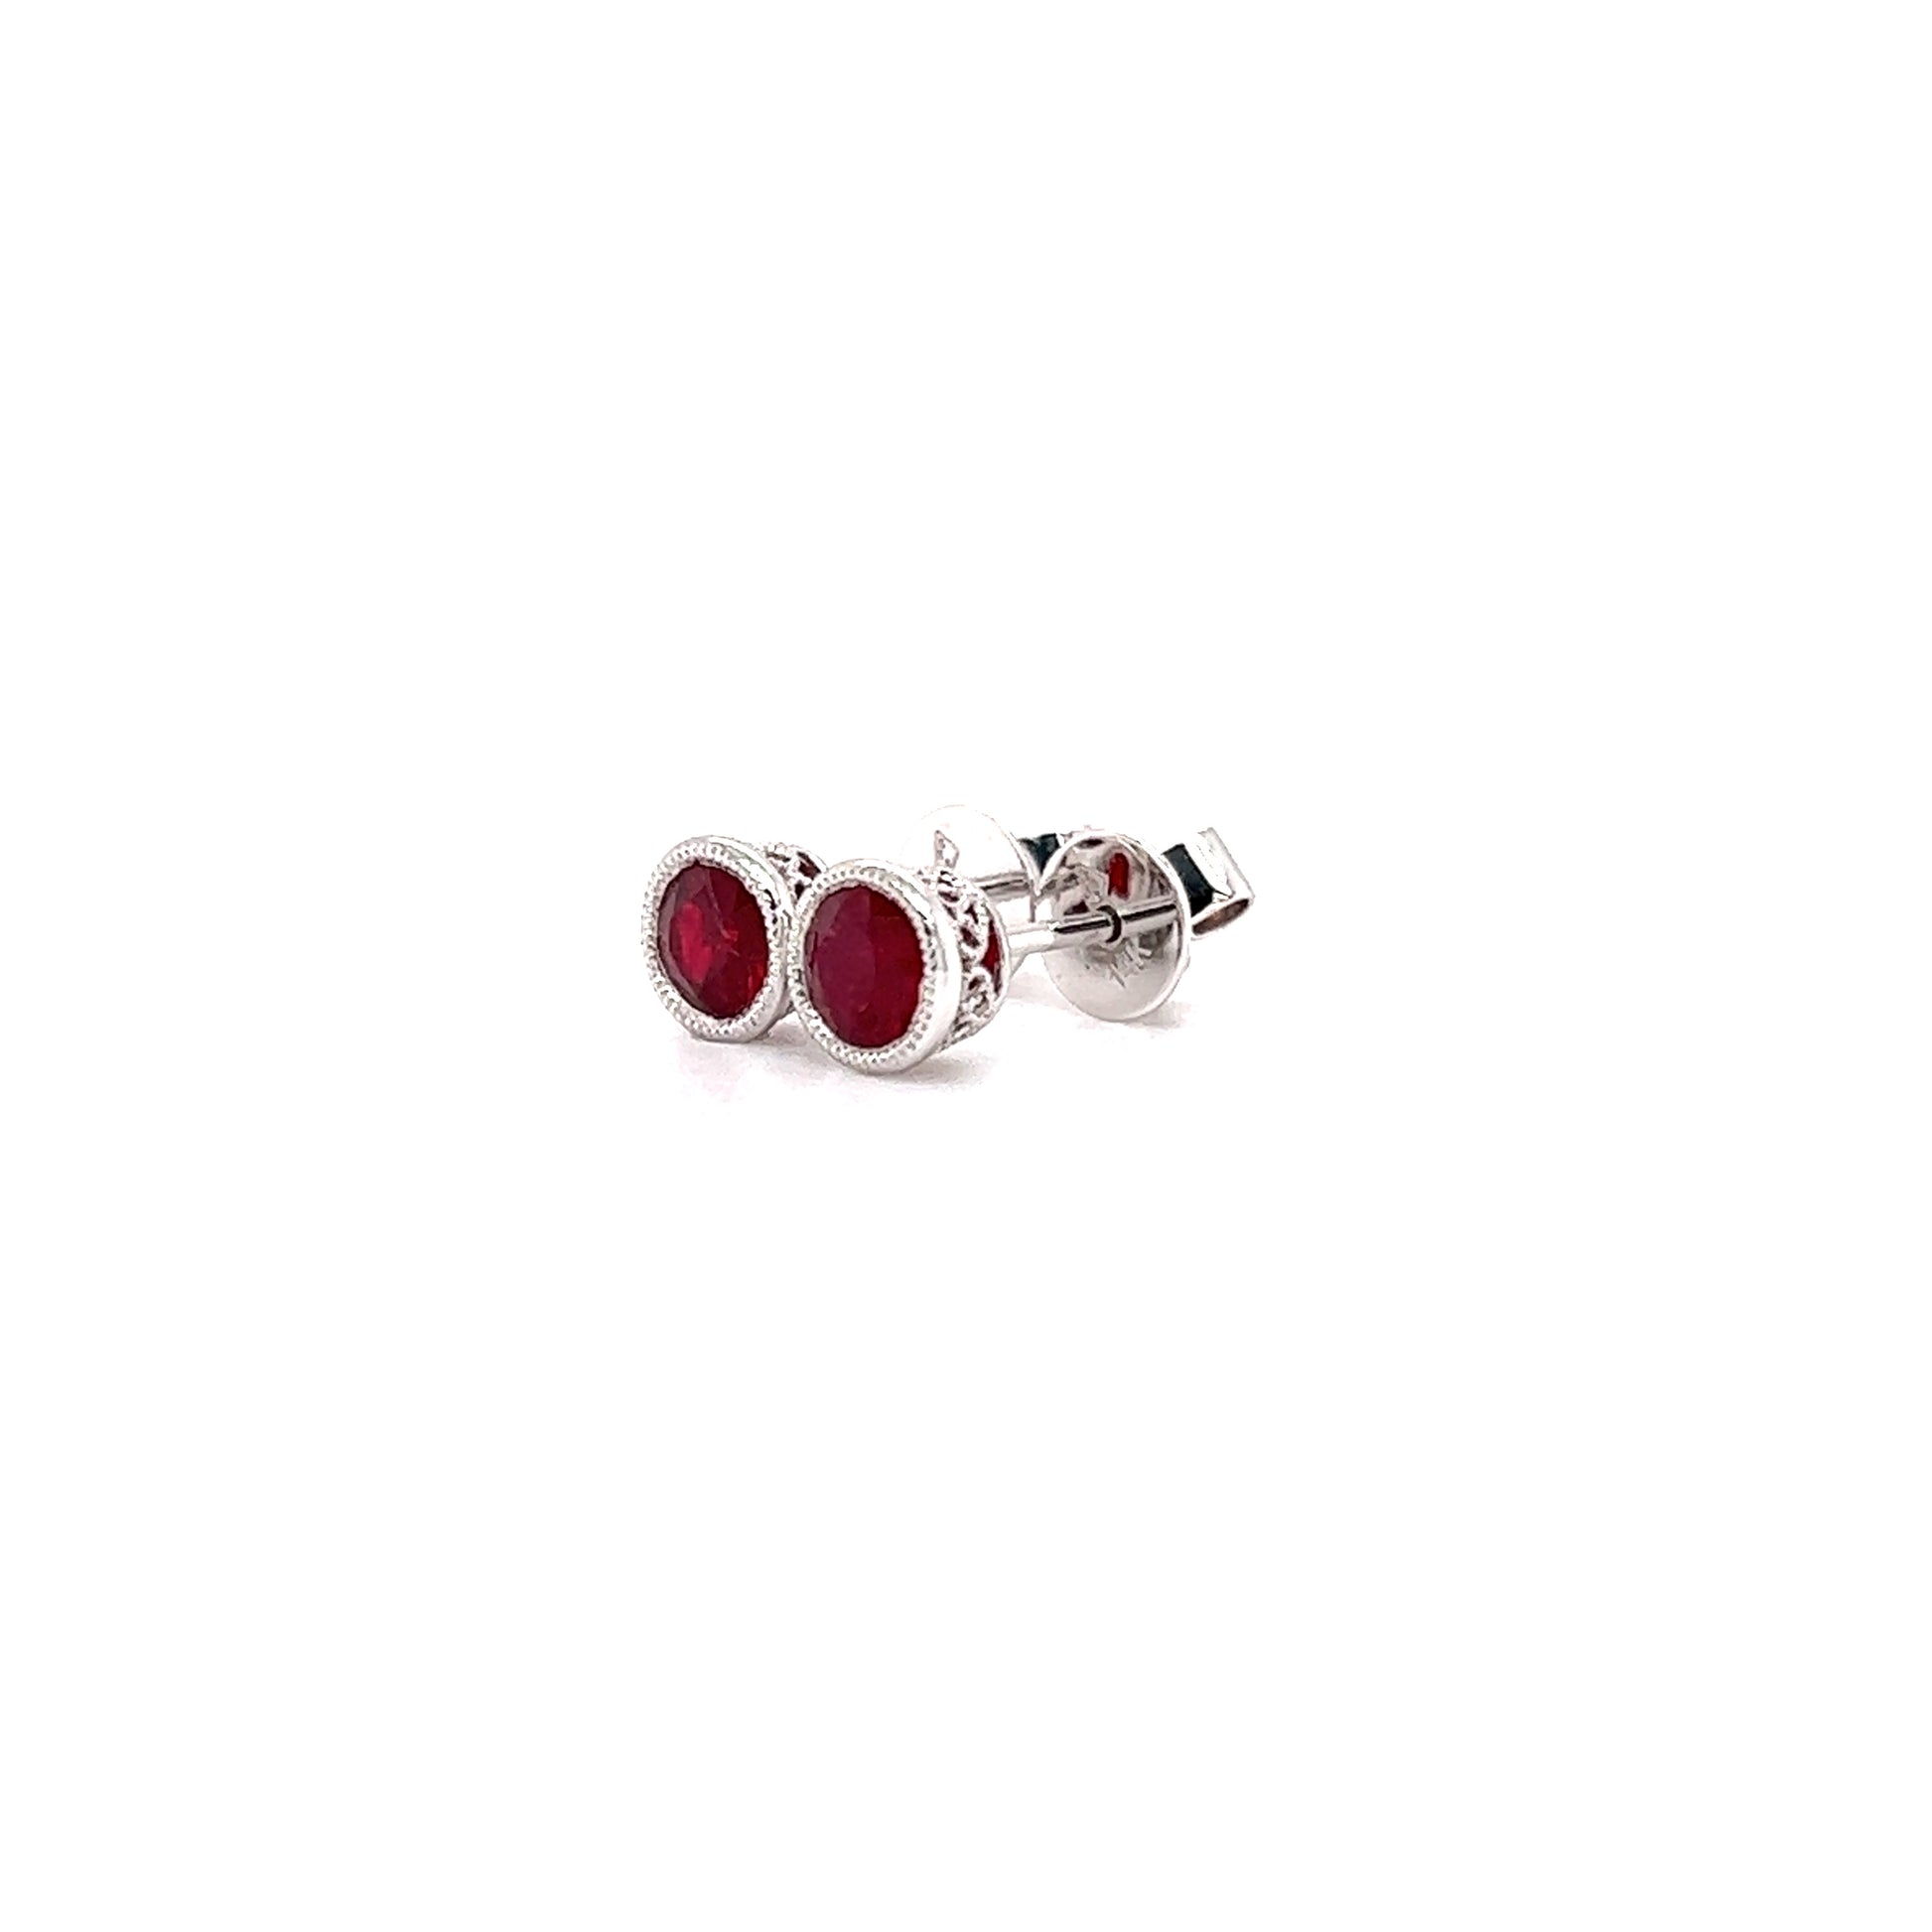 Round Ruby Stud Earrings with Filigree and Milgrain Details in 14K White Gold Right Side View